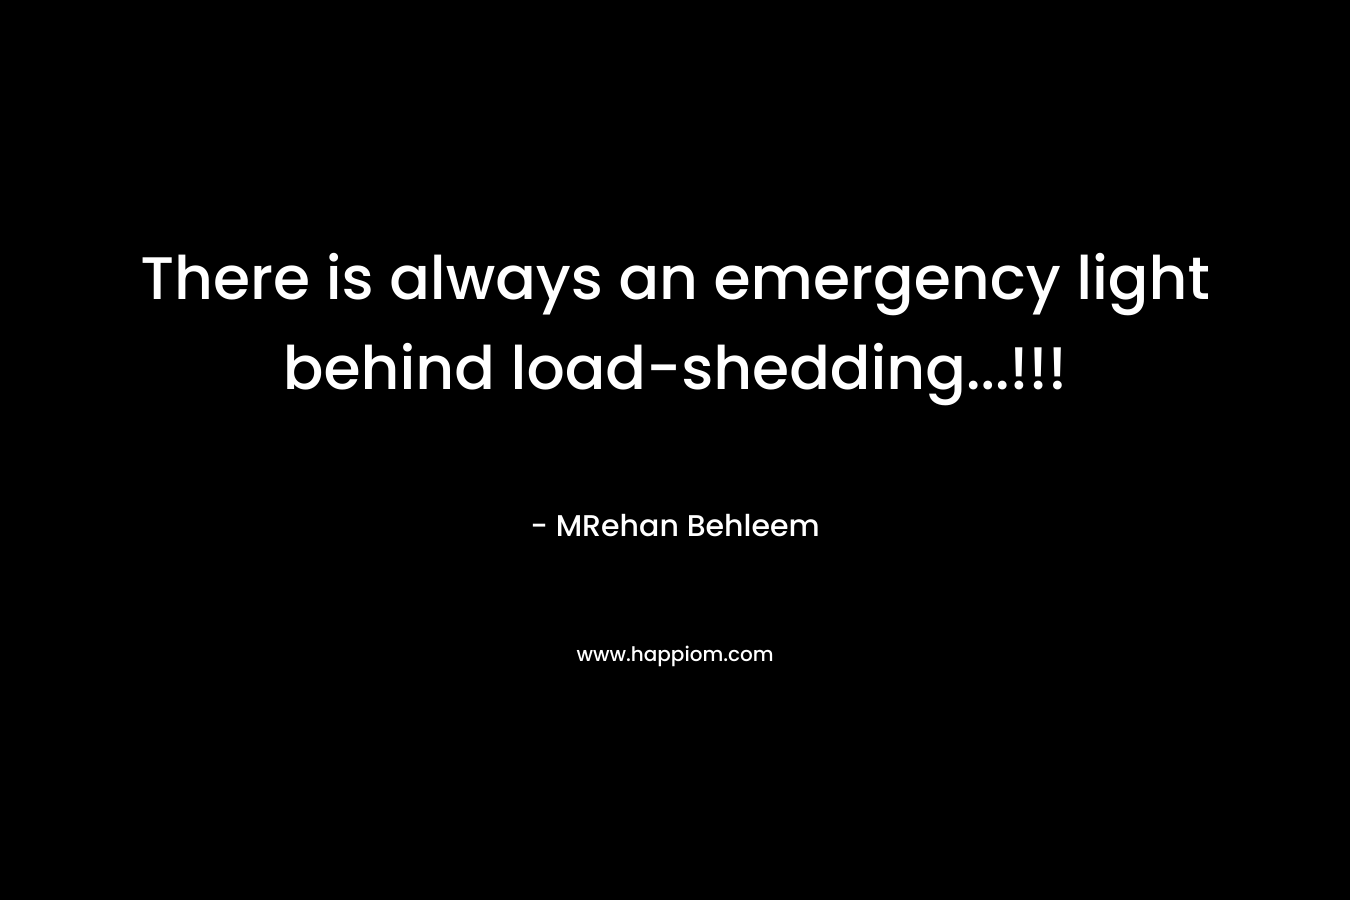 There is always an emergency light behind load-shedding…!!! – MRehan Behleem